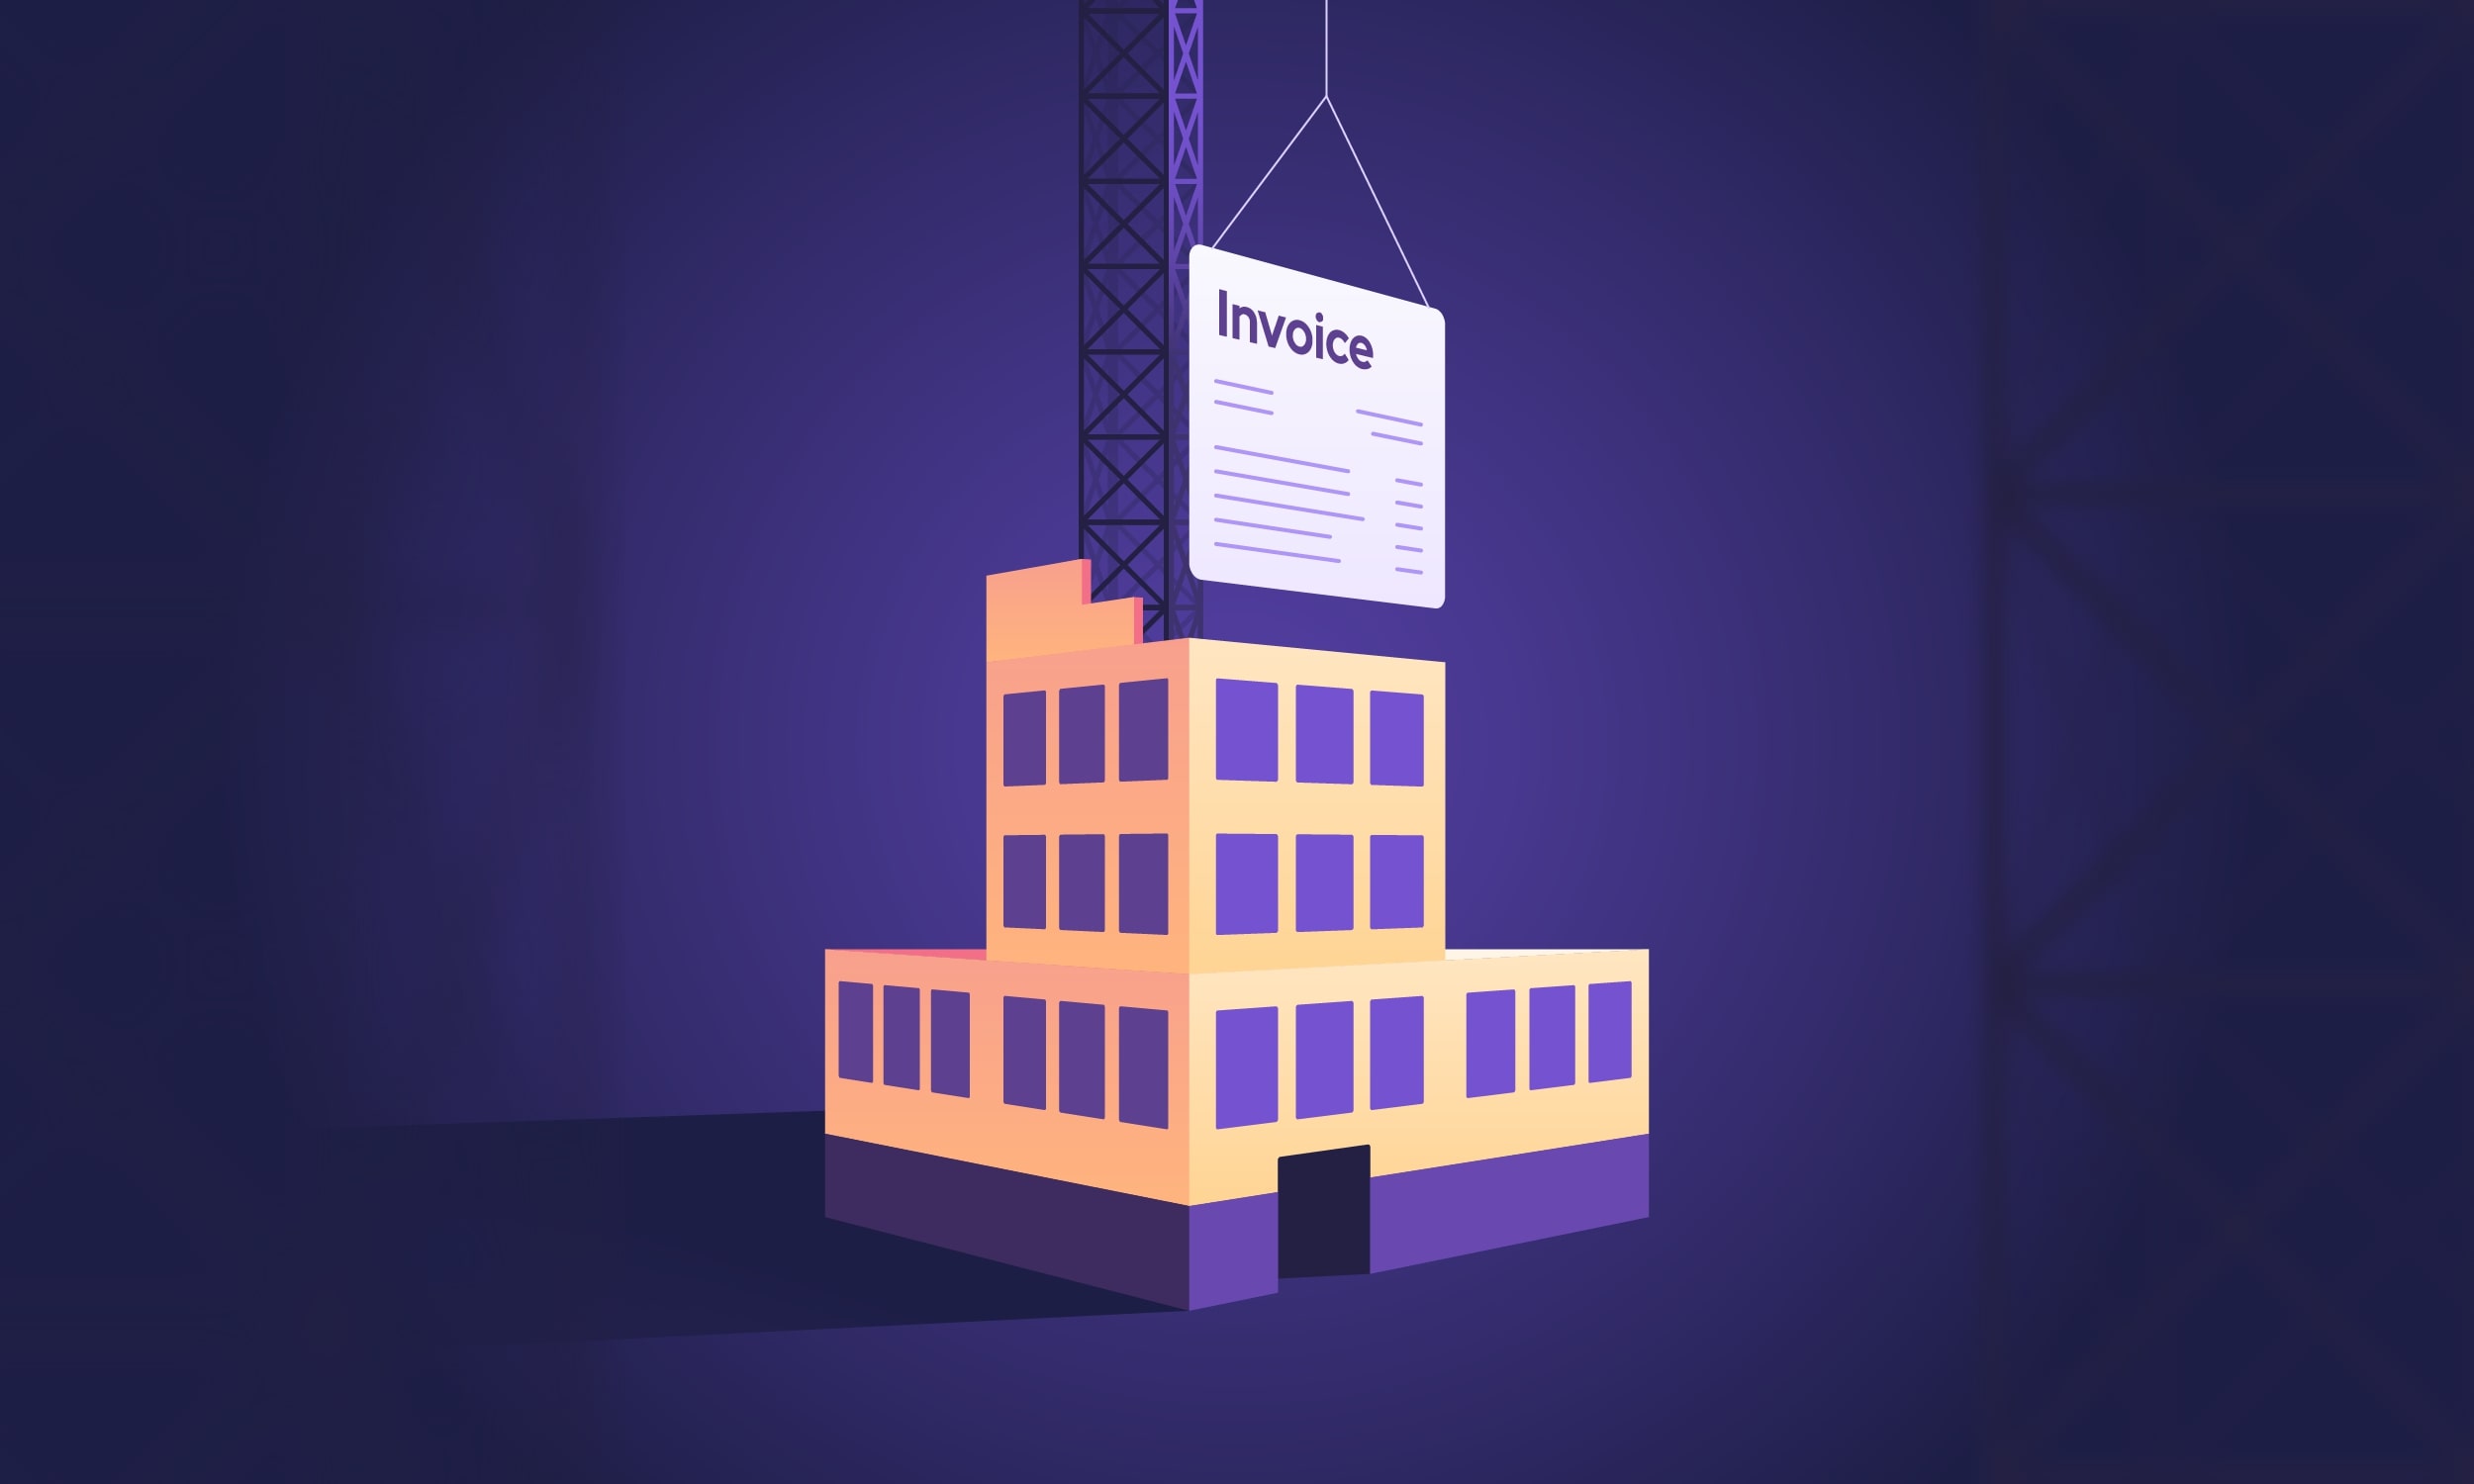 Purple background with building in centre in construction. A crane hovers building block of an invoice over top of building implying the invoice arrives at stages of project completion.